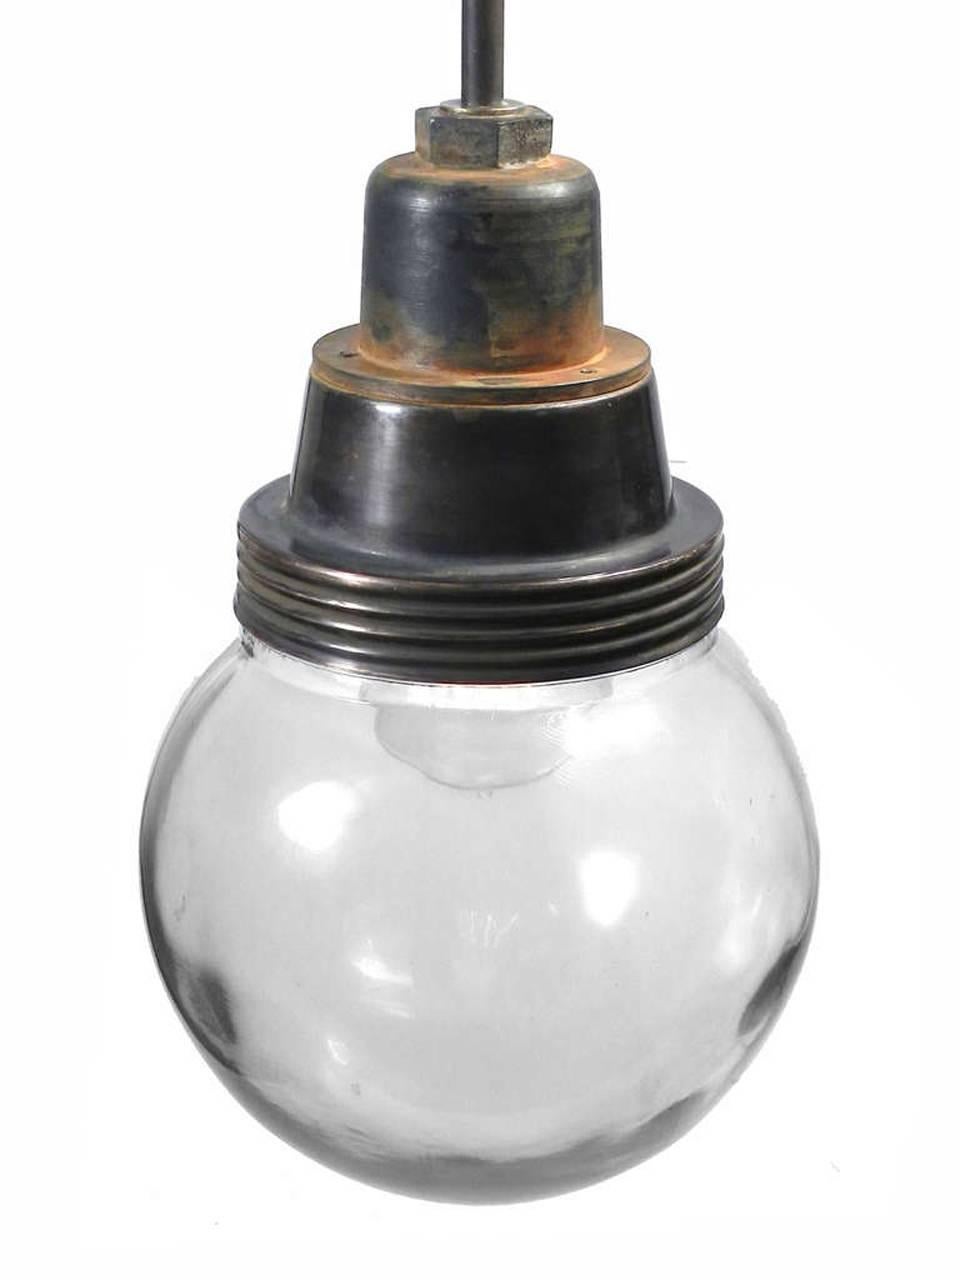 American Mother of All Explosion Proof Globes For Sale